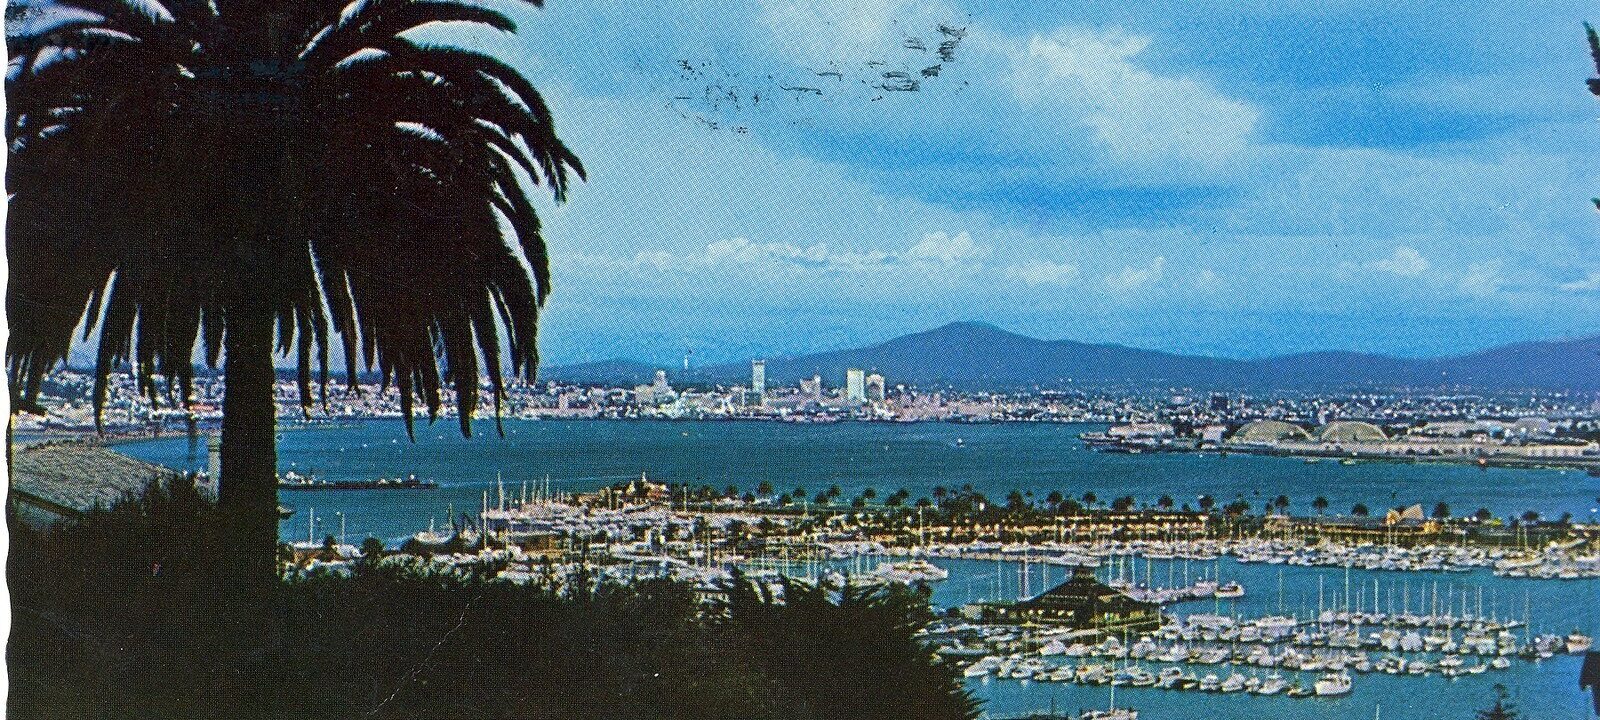 A postcard of Shelter Island and San Diego Bay as seen from Point Loma, postmarked June 16, 1972. (Mike Roberts on Wikipedia.)